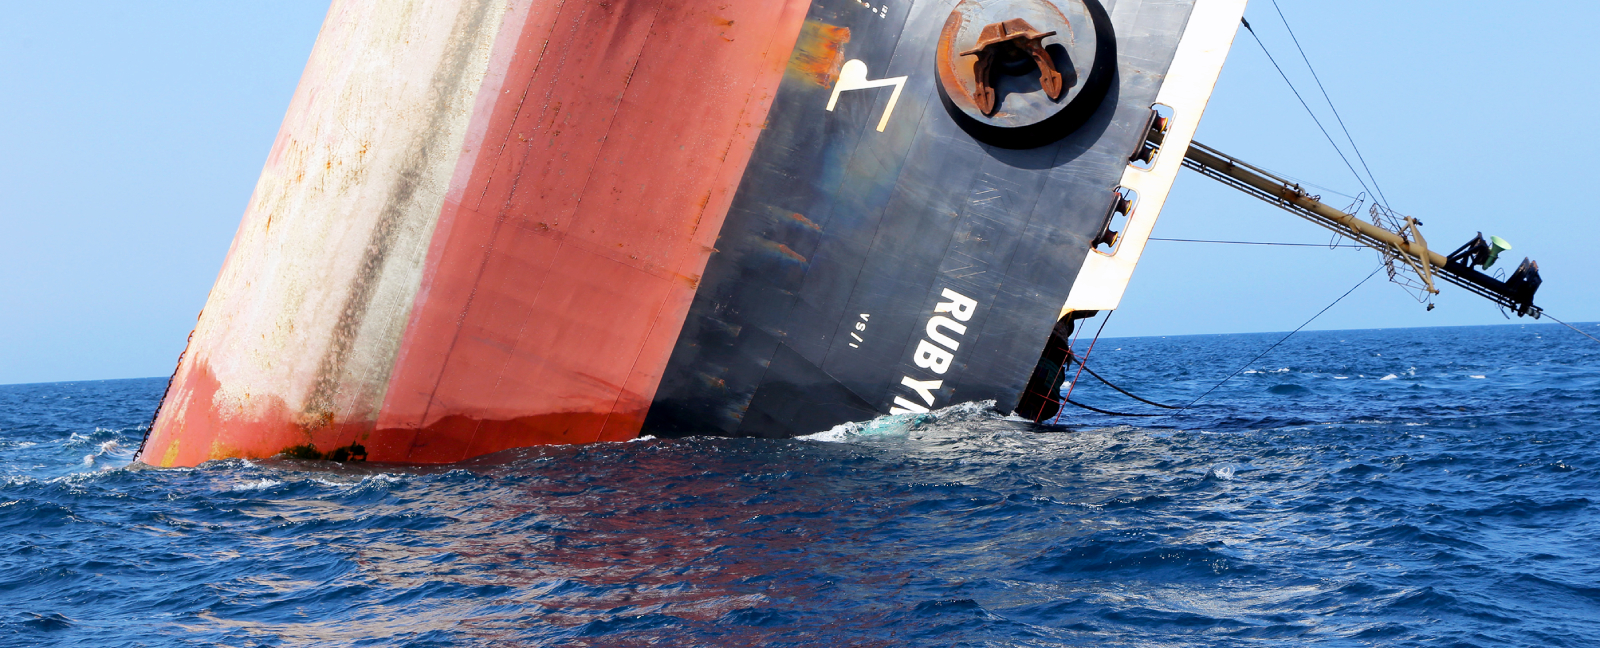 The shipping vessel Rubymar capsizing in the Red Sea after a Houthi missile attack.